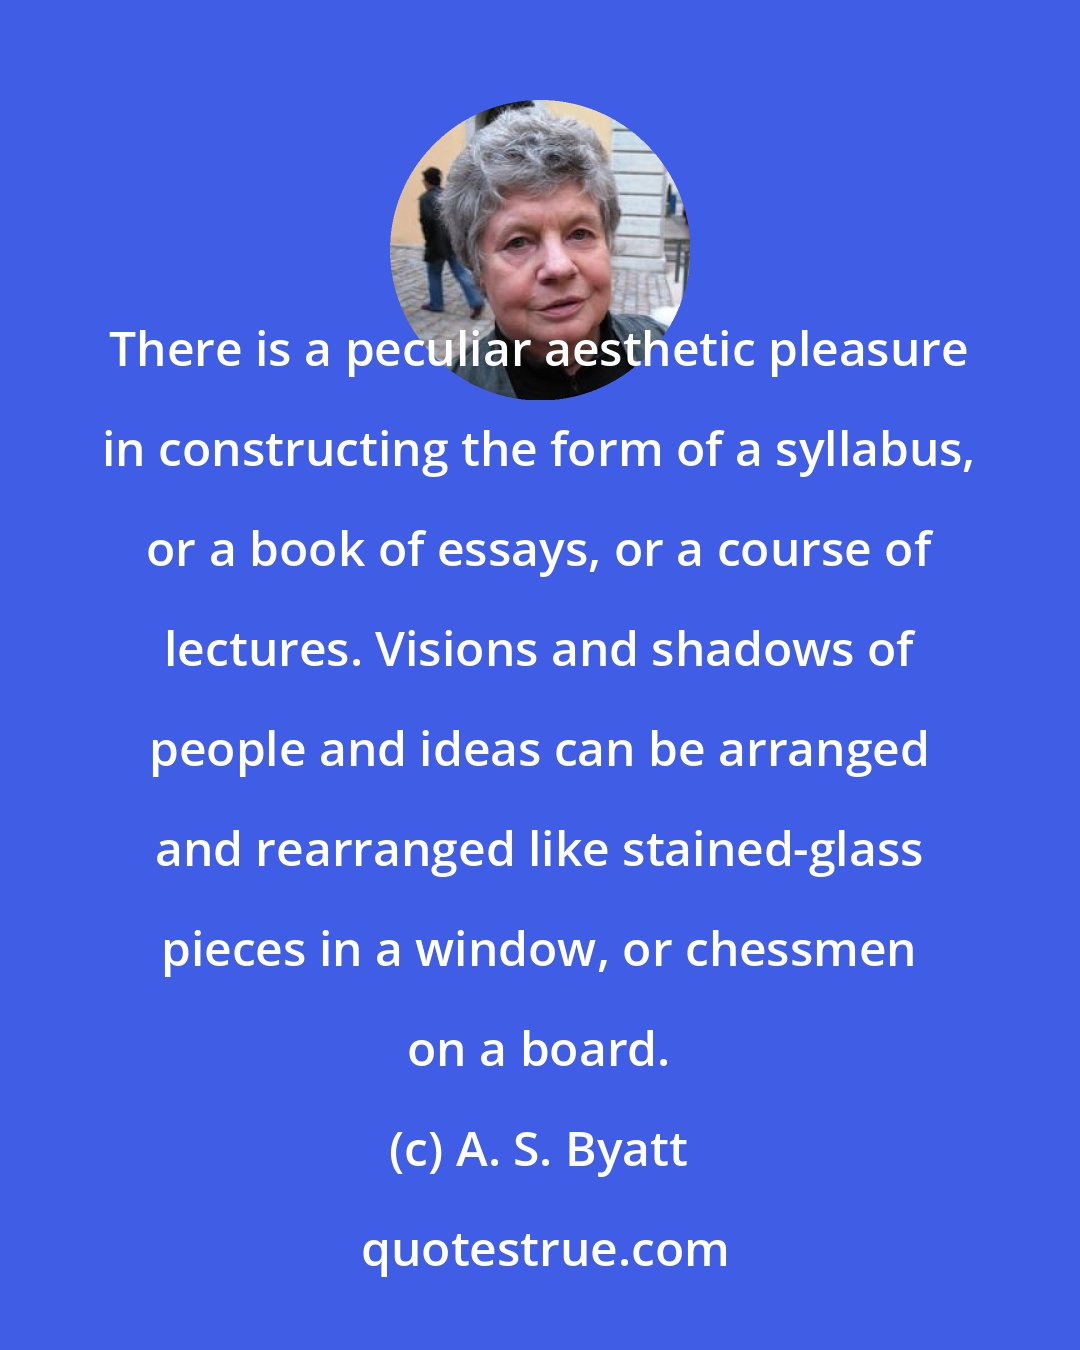 A. S. Byatt: There is a peculiar aesthetic pleasure in constructing the form of a syllabus, or a book of essays, or a course of lectures. Visions and shadows of people and ideas can be arranged and rearranged like stained-glass pieces in a window, or chessmen on a board.